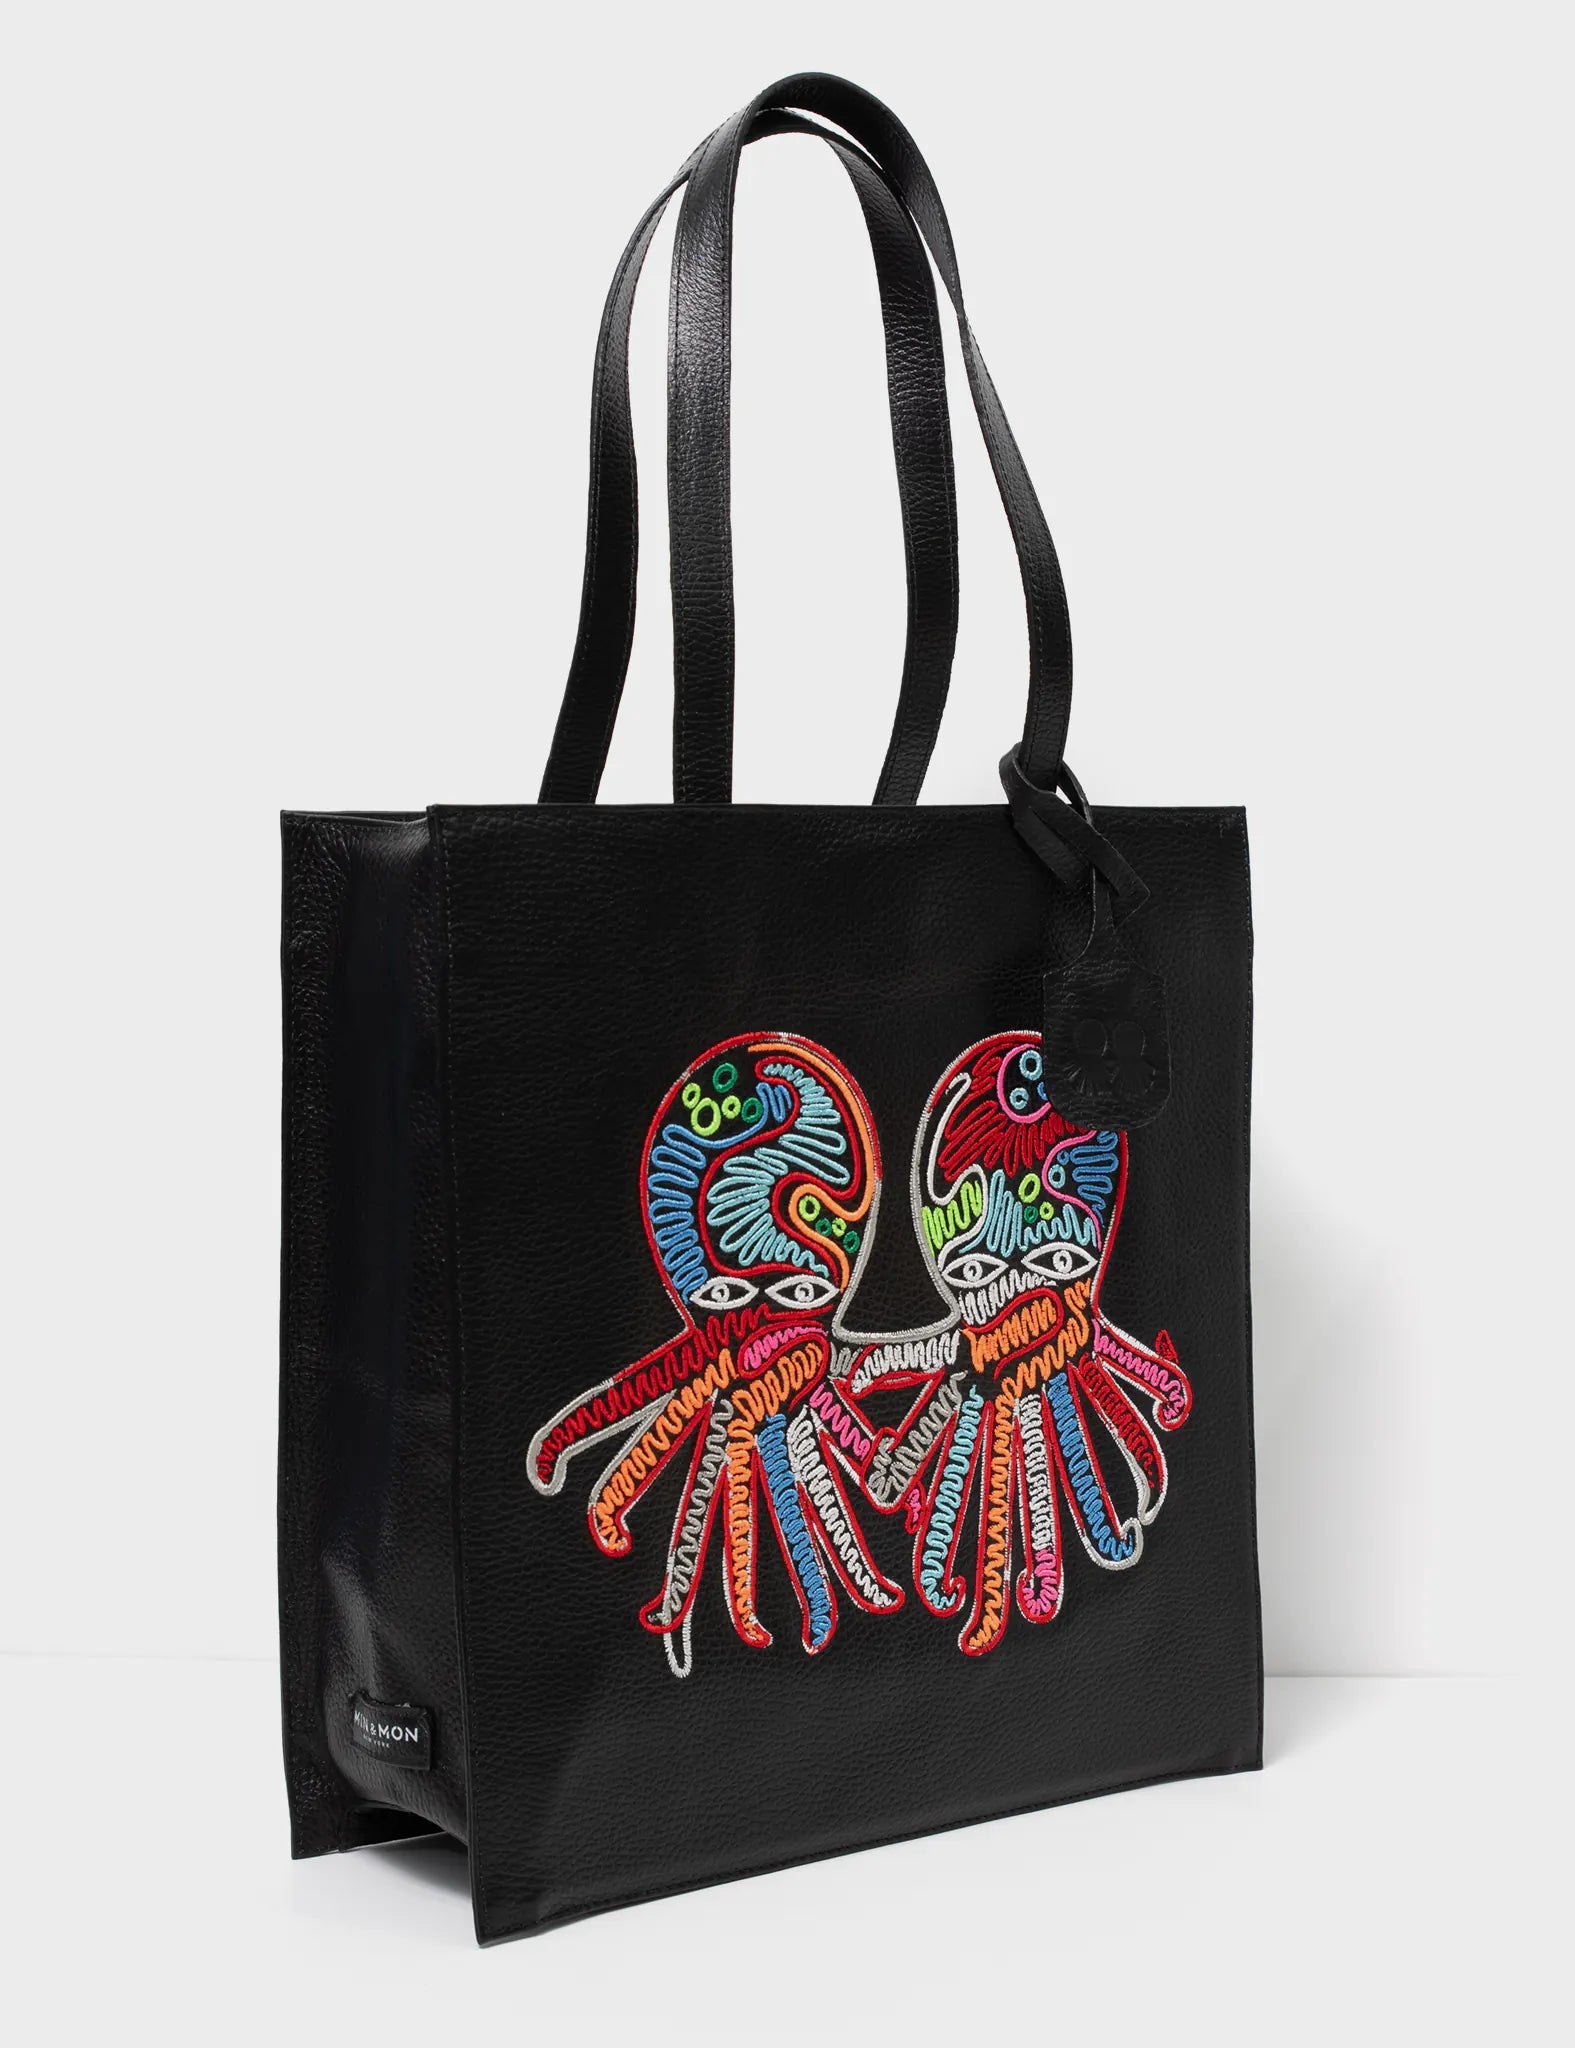 Black Leather Tote Bag - Multicolored Octopus Cord Embroidery